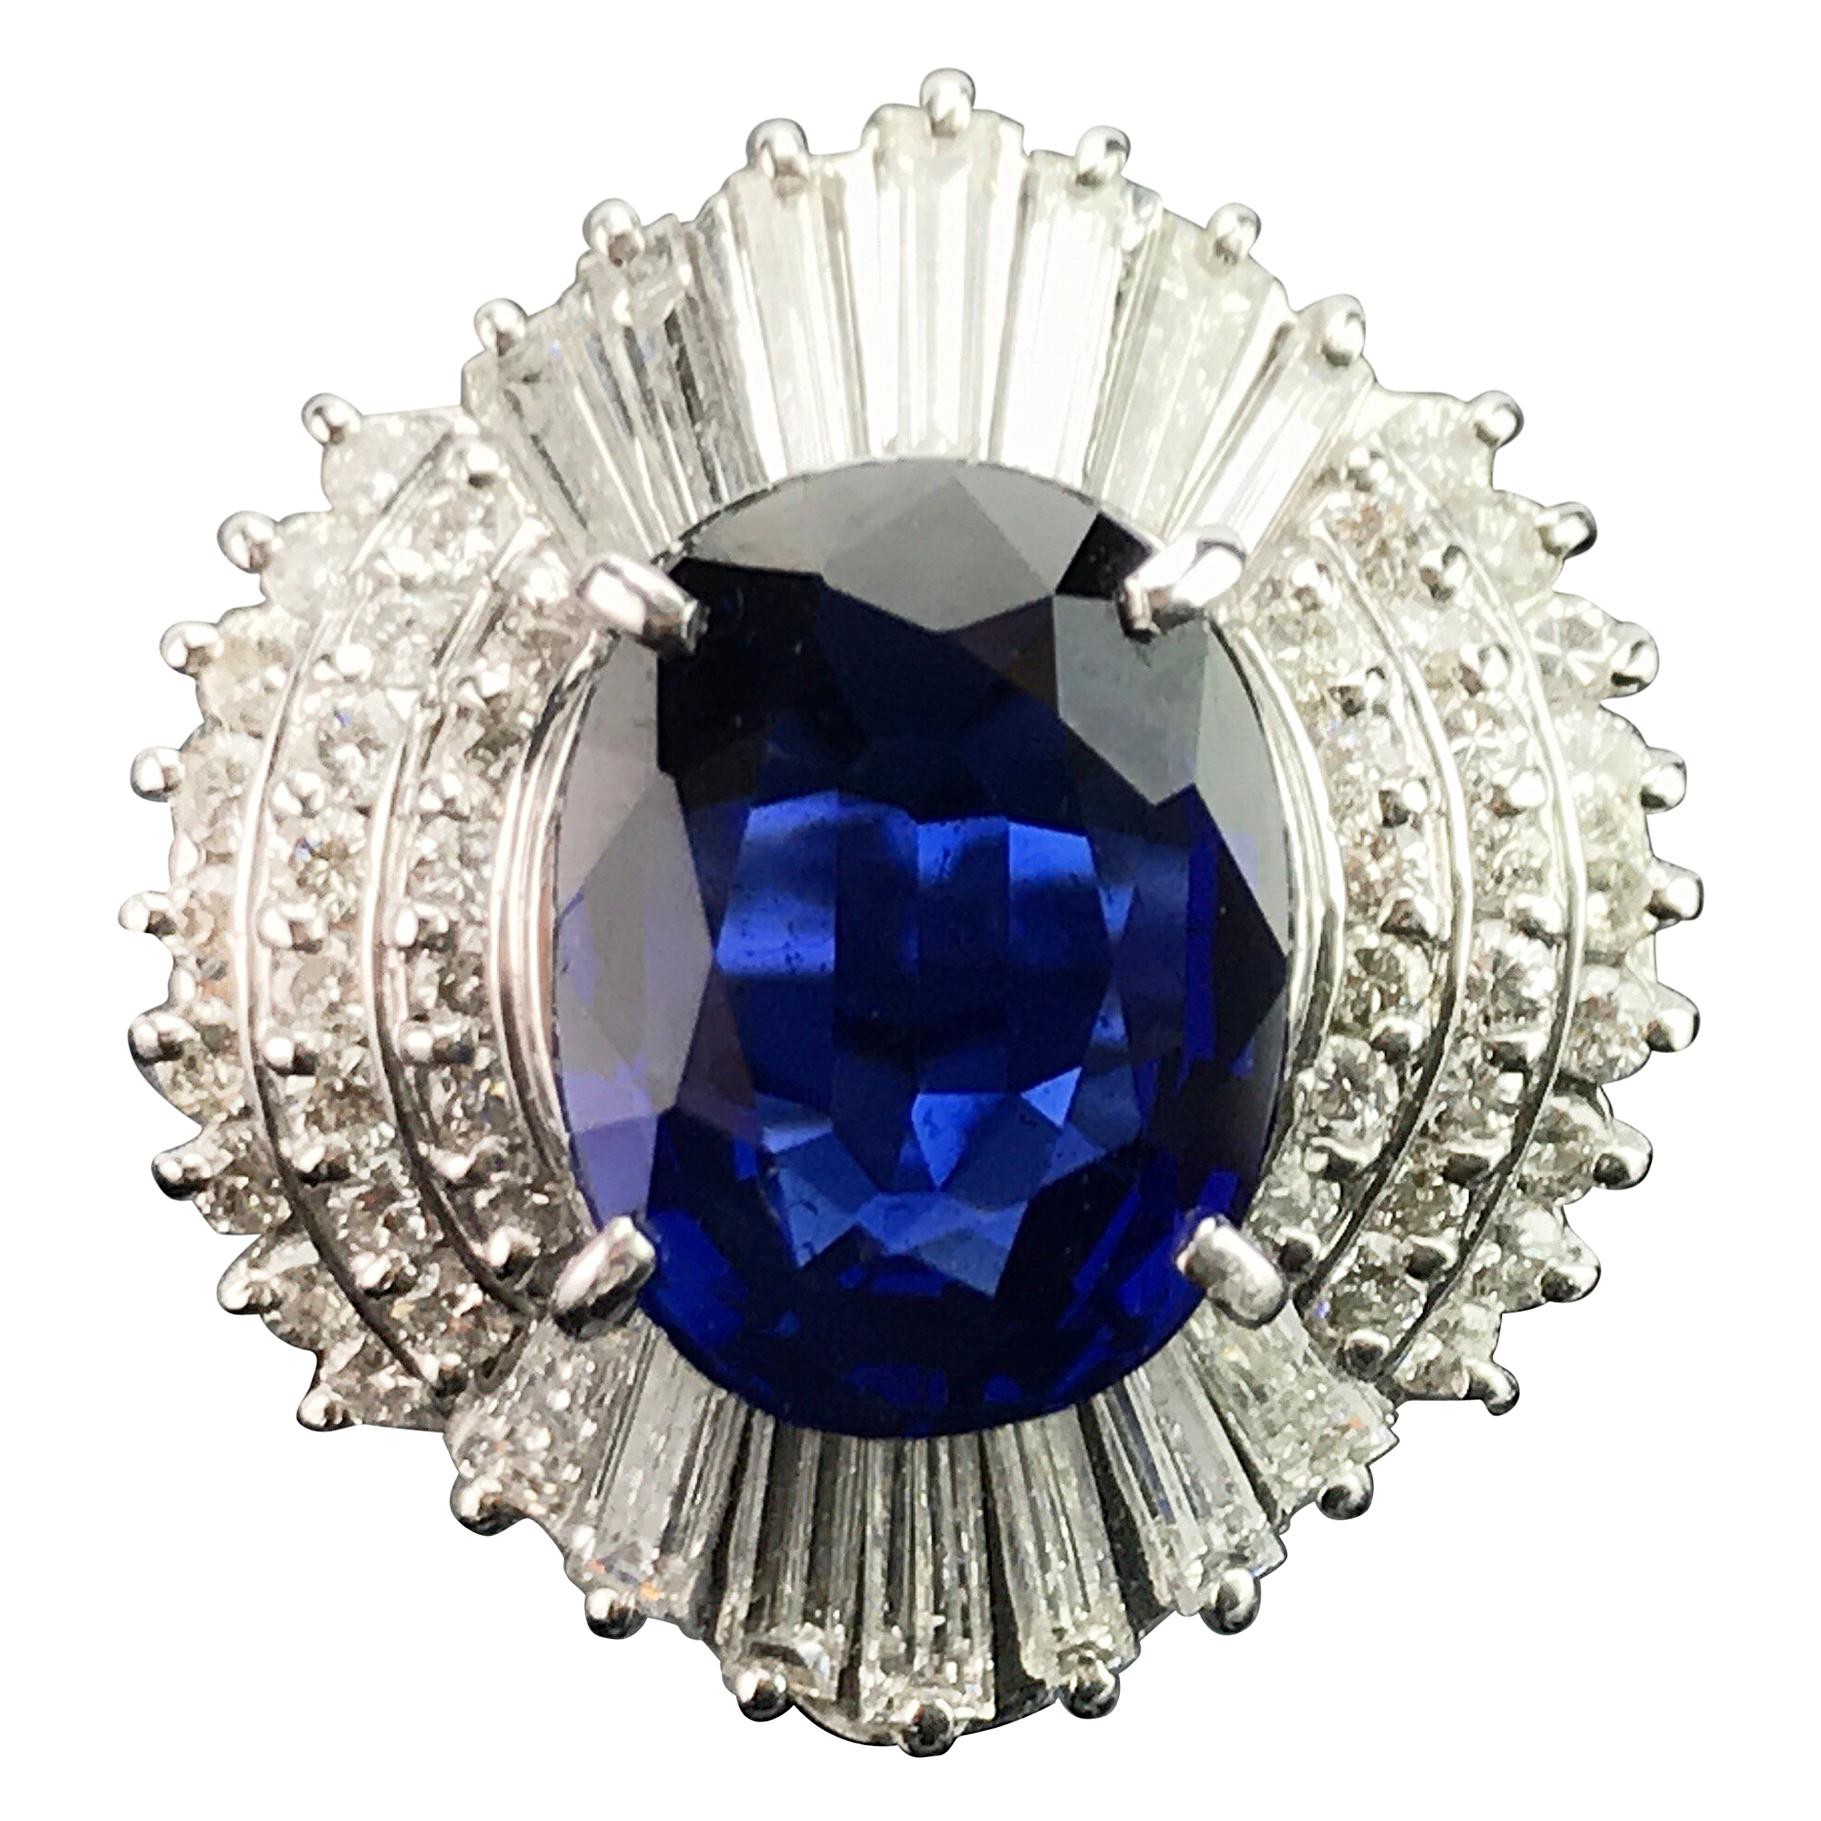 5.63 Carat Blue Sapphire and Diamond Cocktail Ring